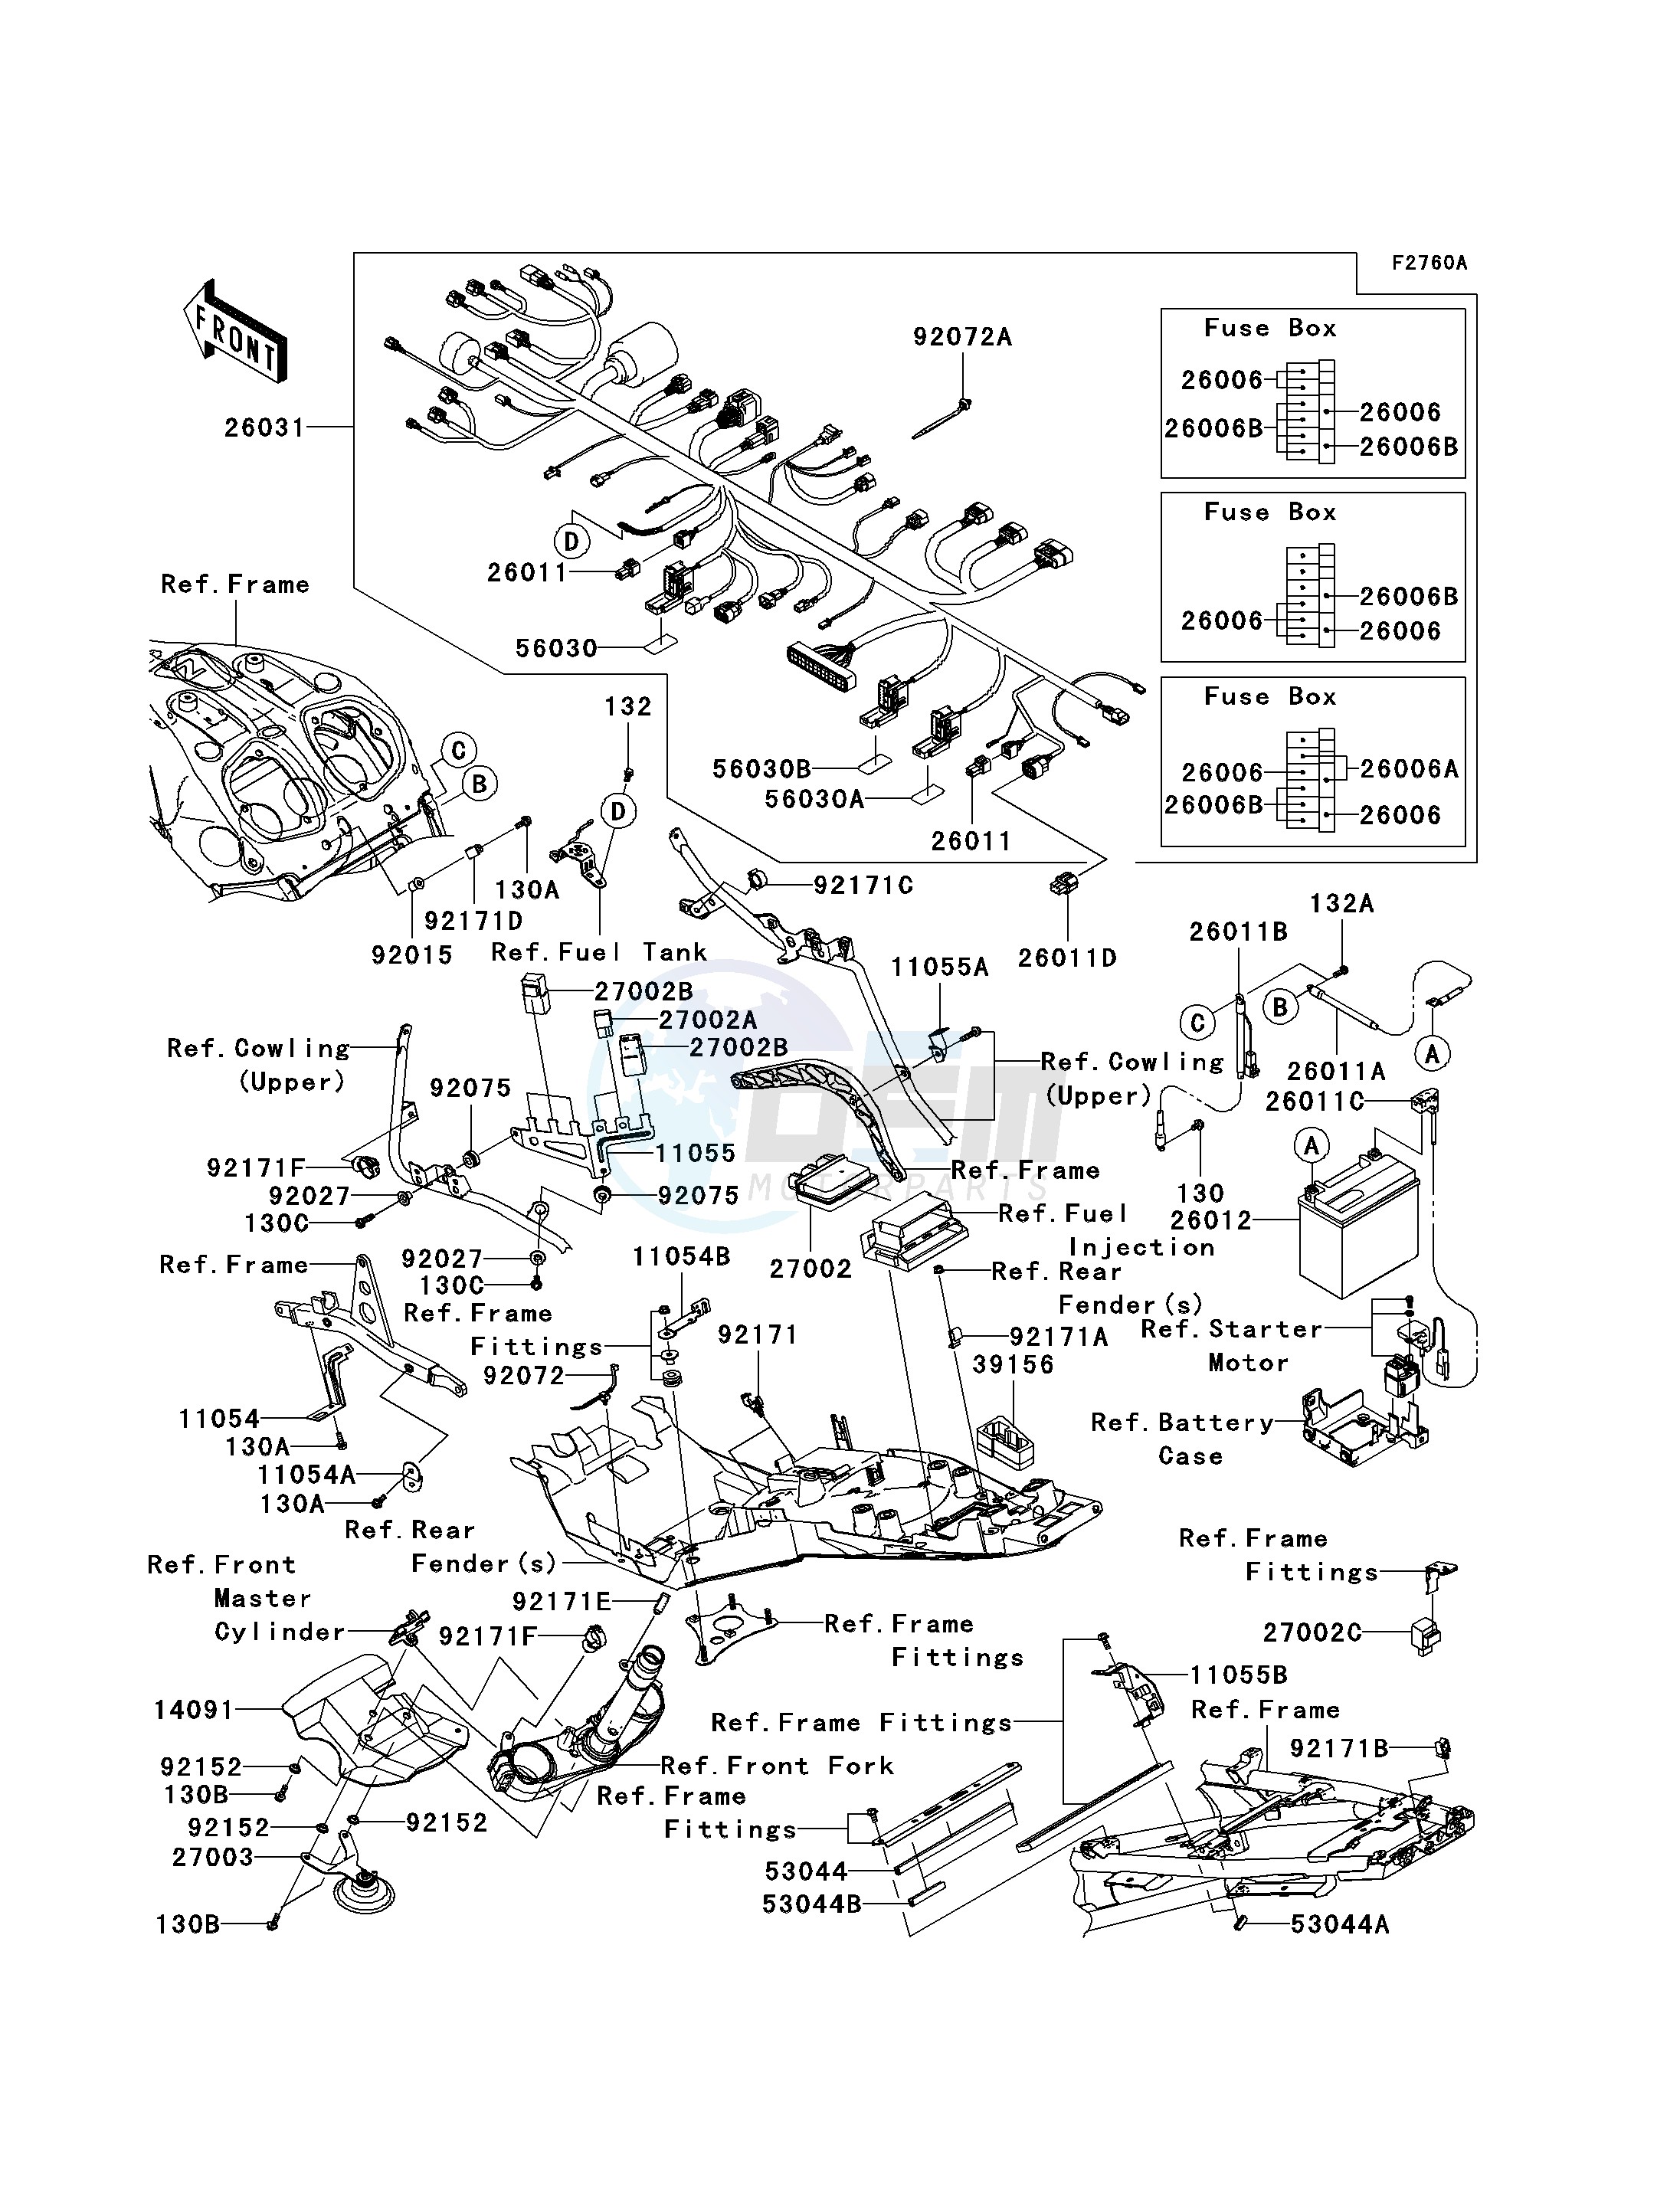 CHASSIS ELECTRICAL EQUIPMENT -- B9F- - blueprint